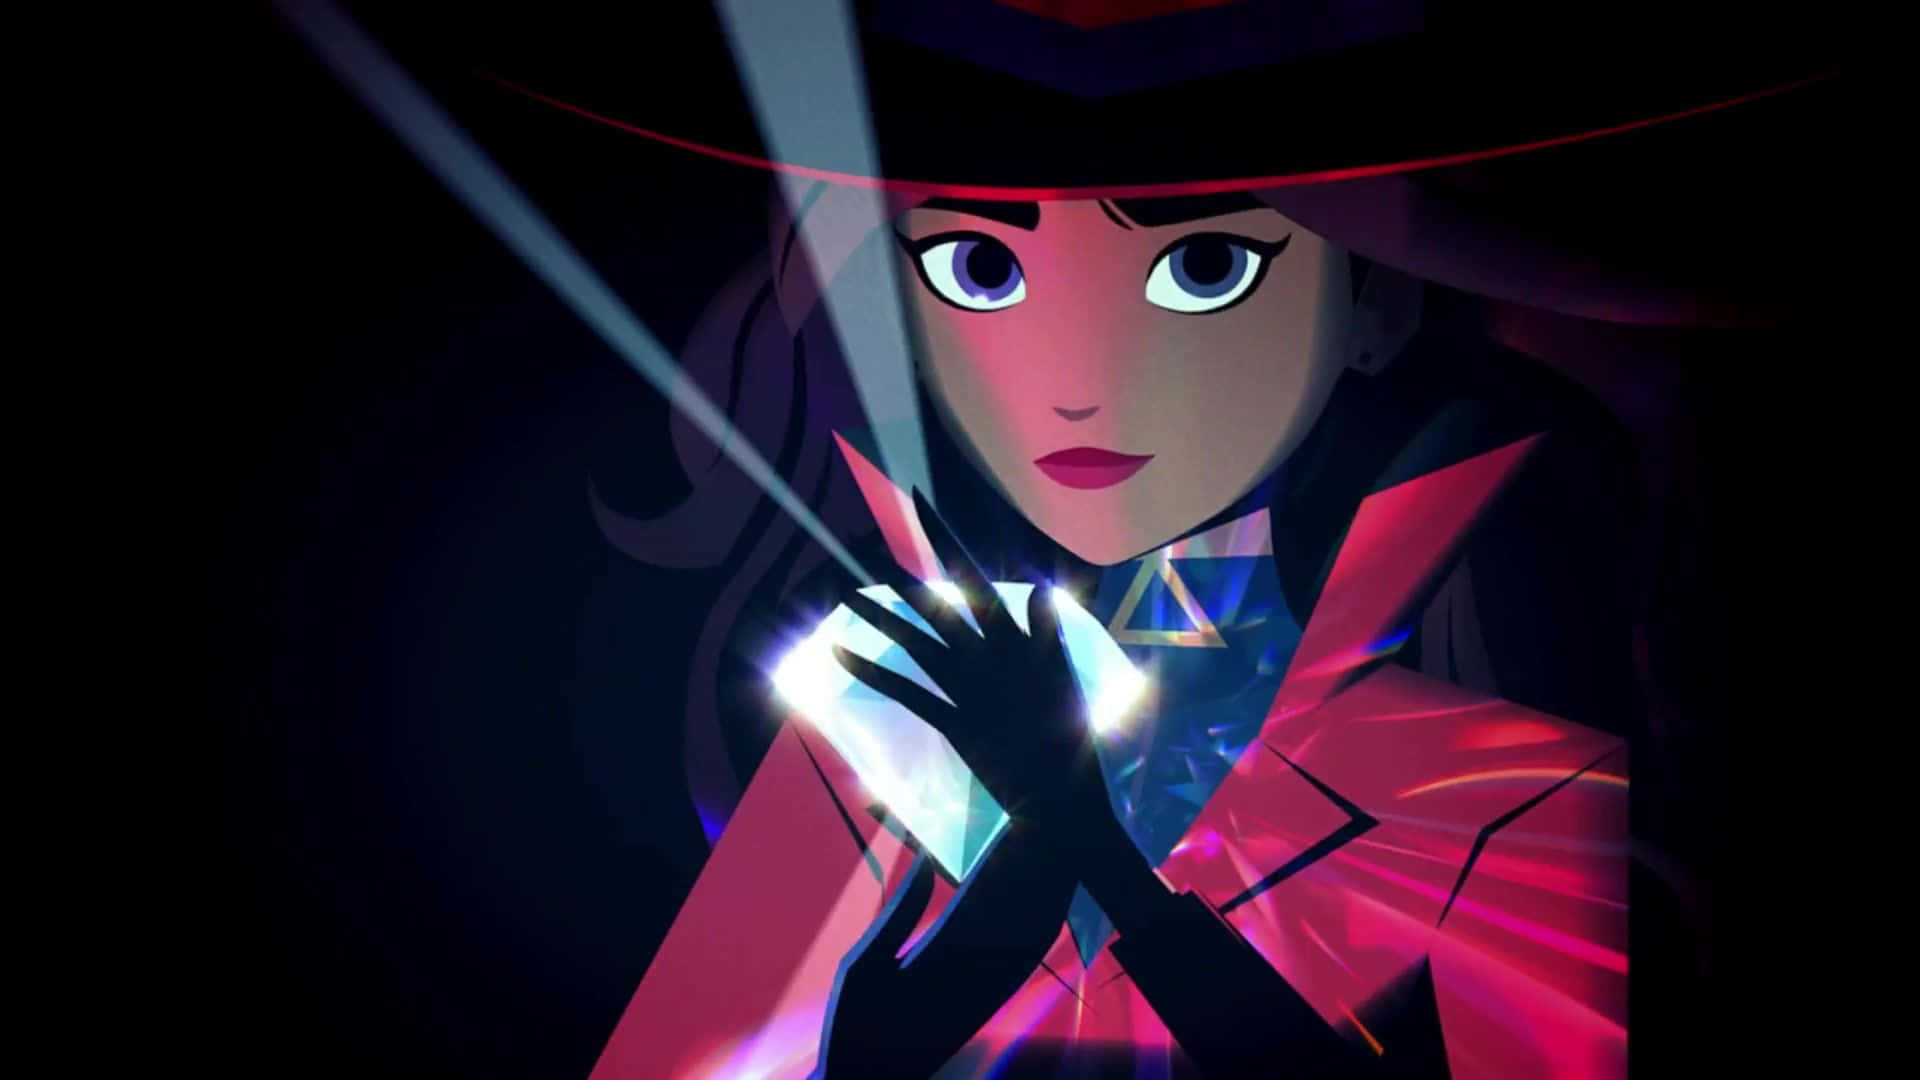 Where in the World is Carmen Sandiego?" Wallpaper